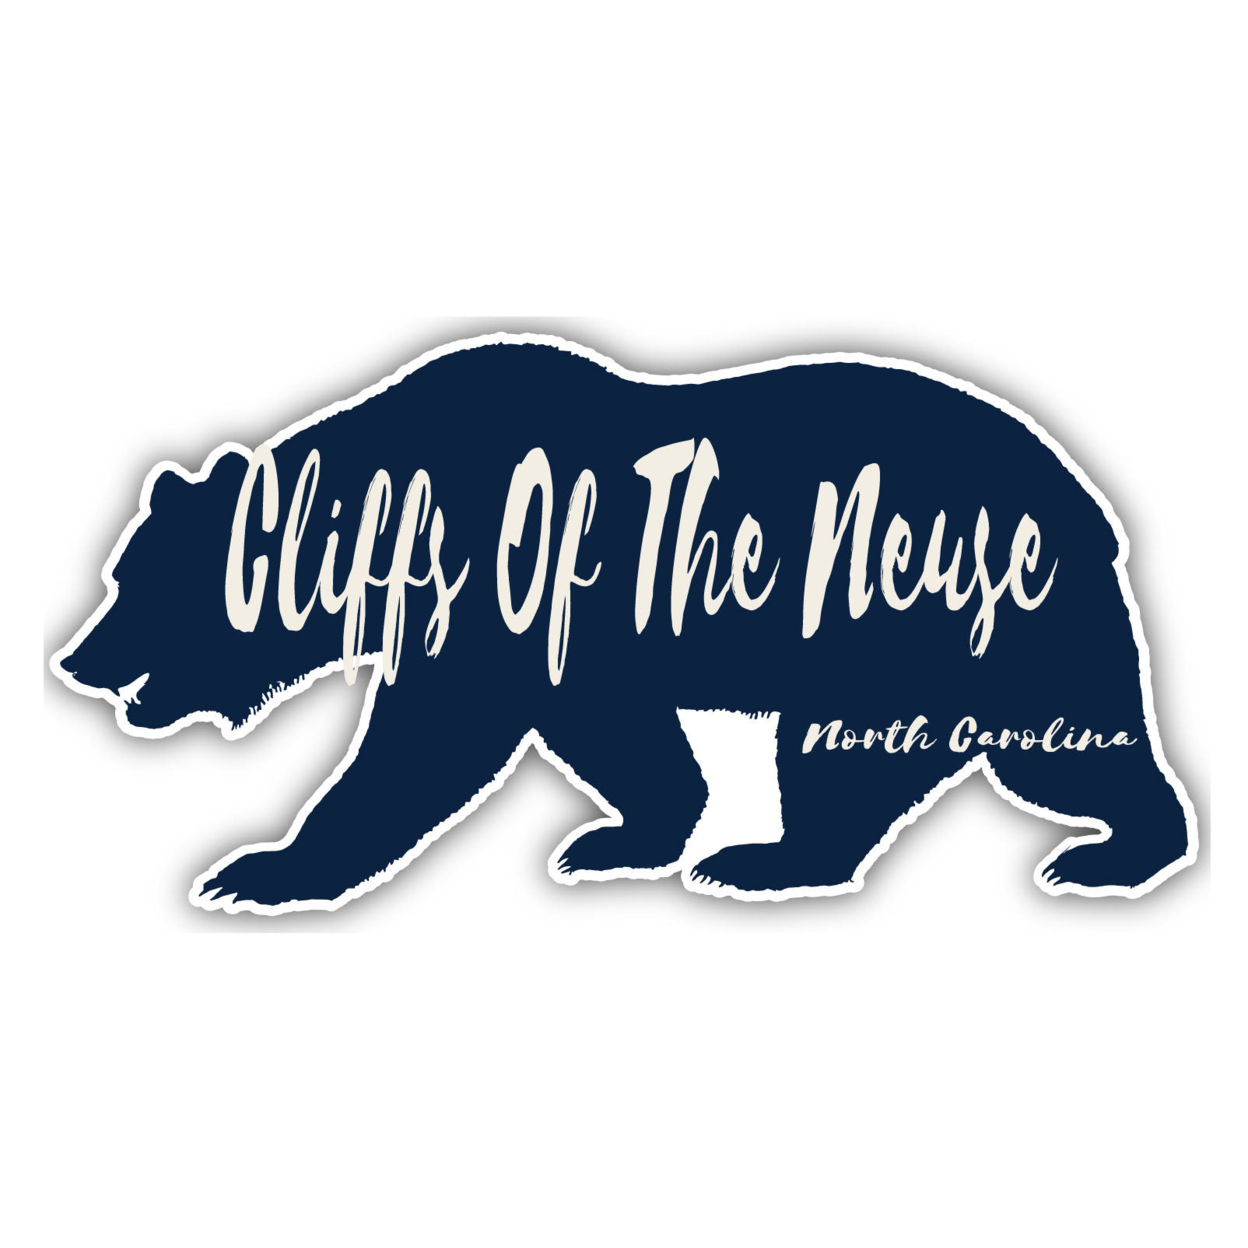 Cliffs Of The Neuse North Carolina Souvenir Decorative Stickers (Choose Theme And Size) - 4-Pack, 8-Inch, Bear